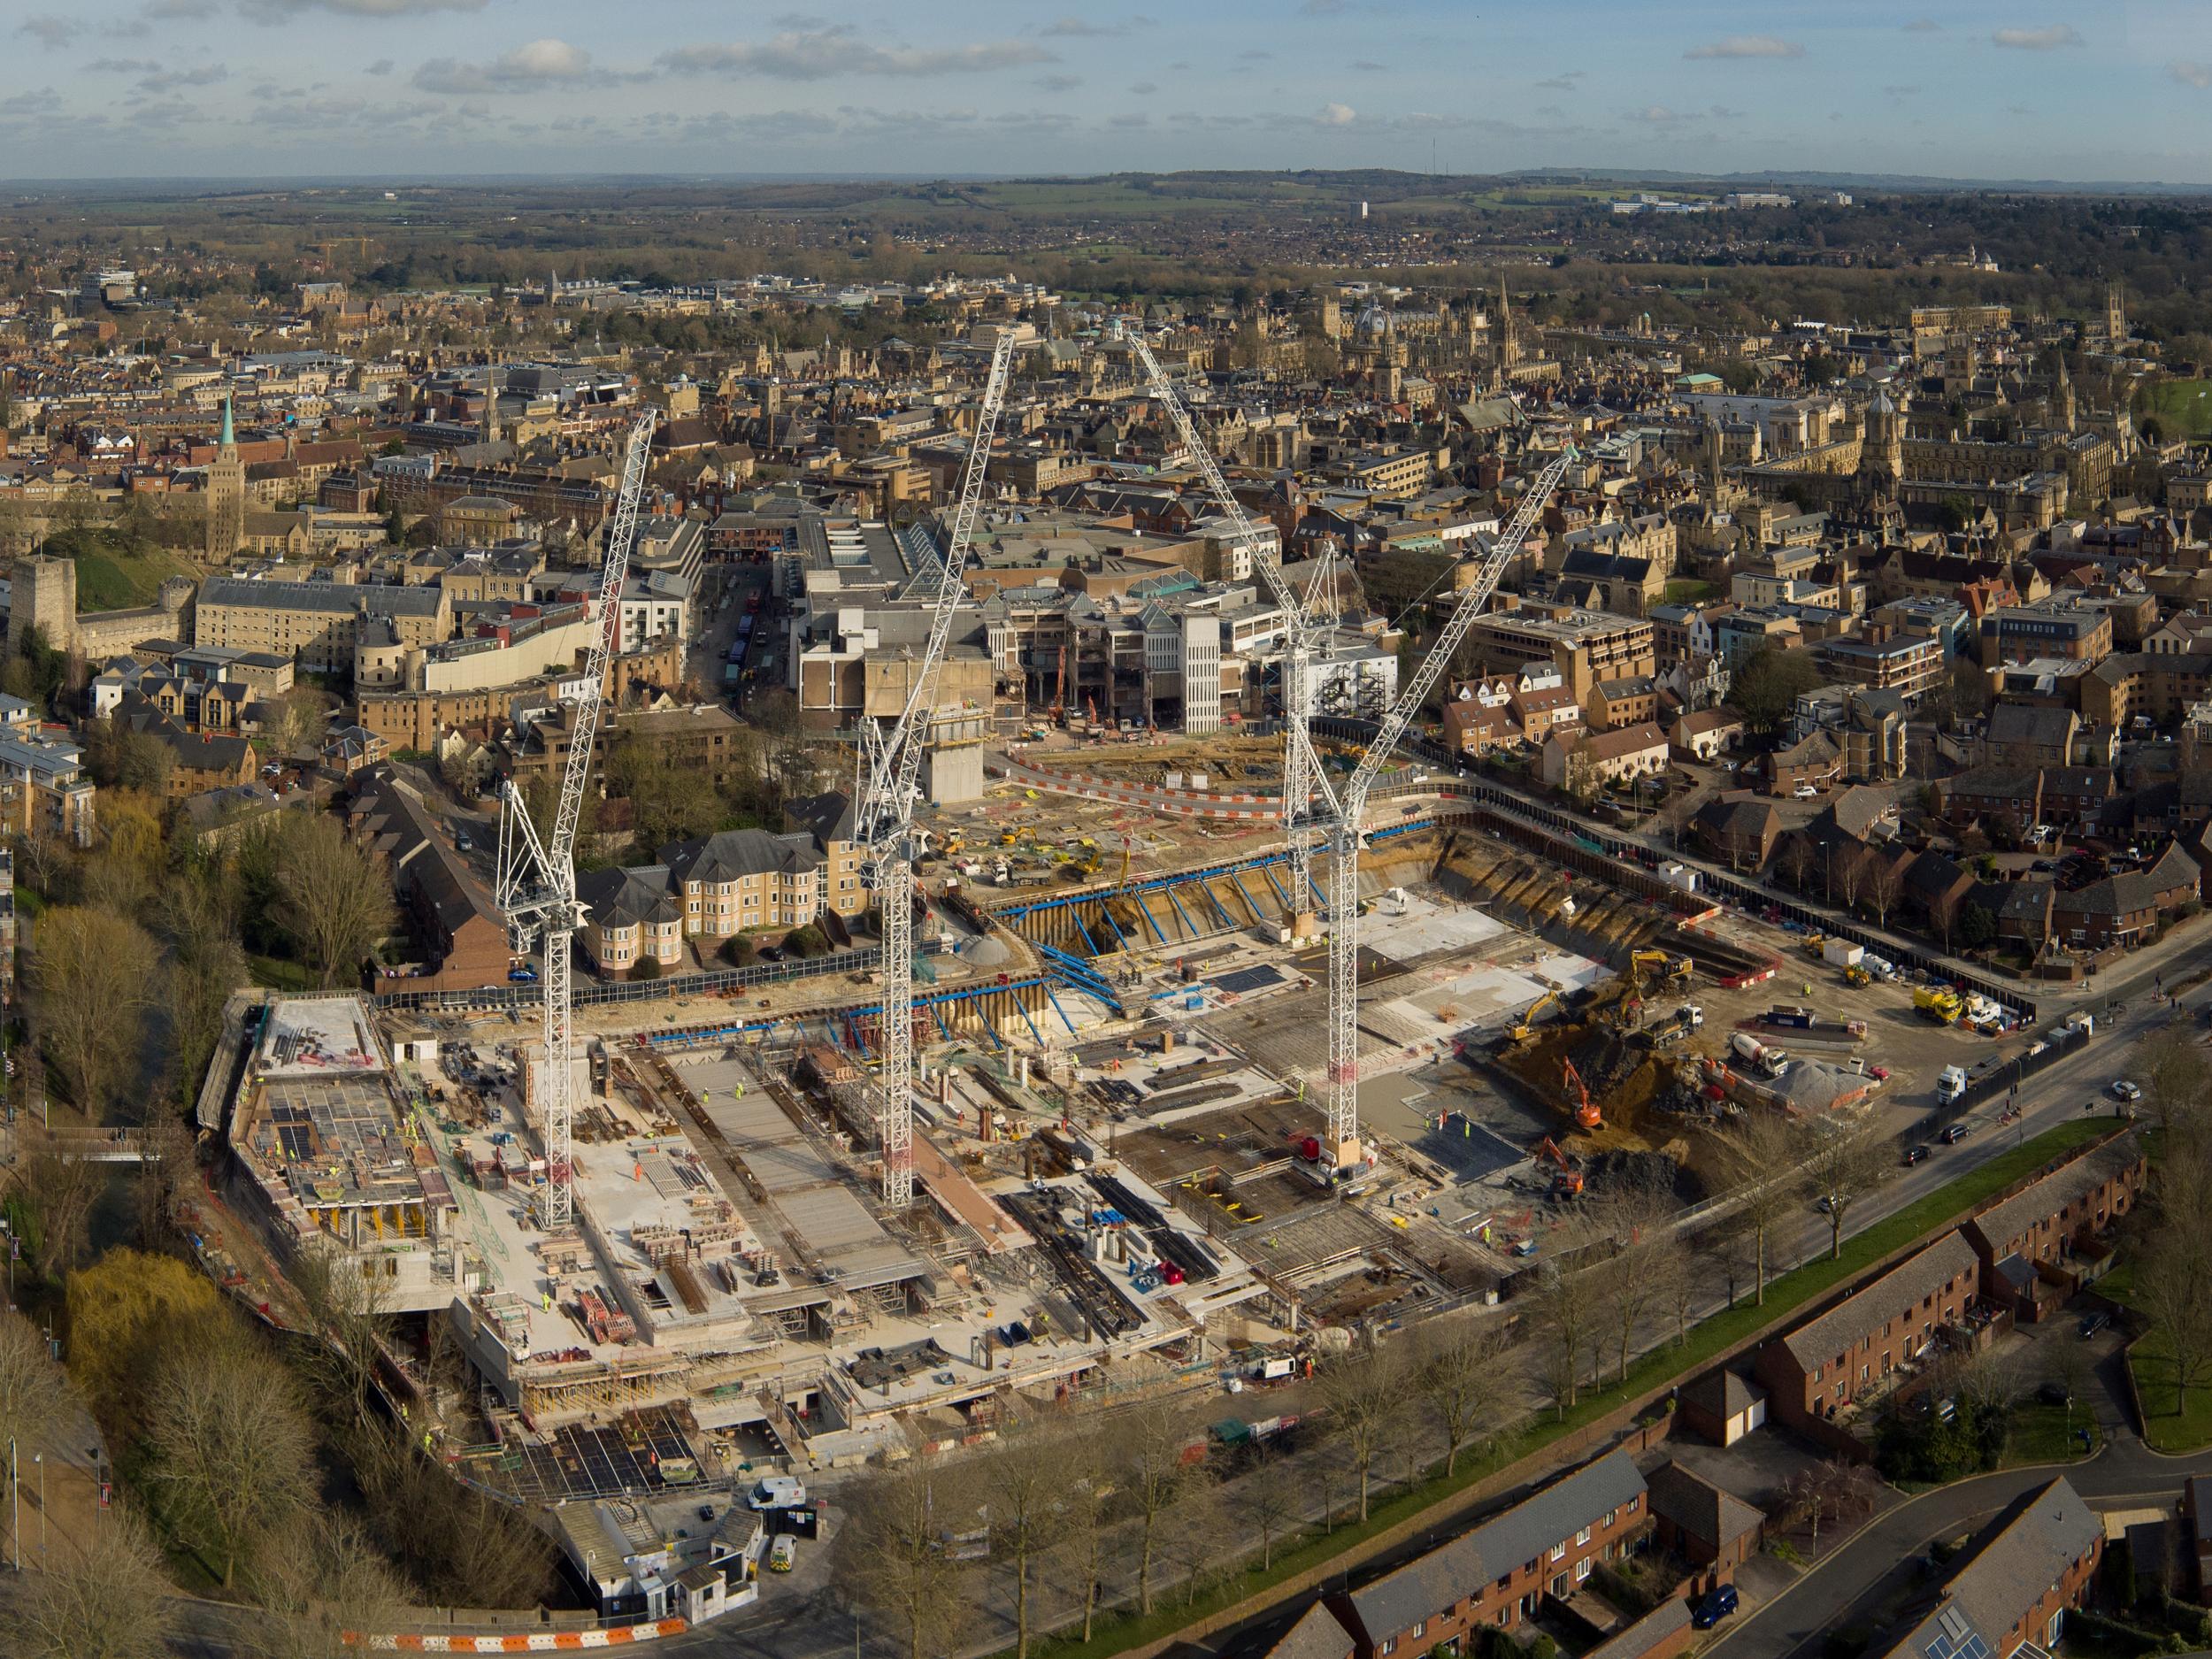 Oxford’s medieval secrets: a panorama of the development site and excavations